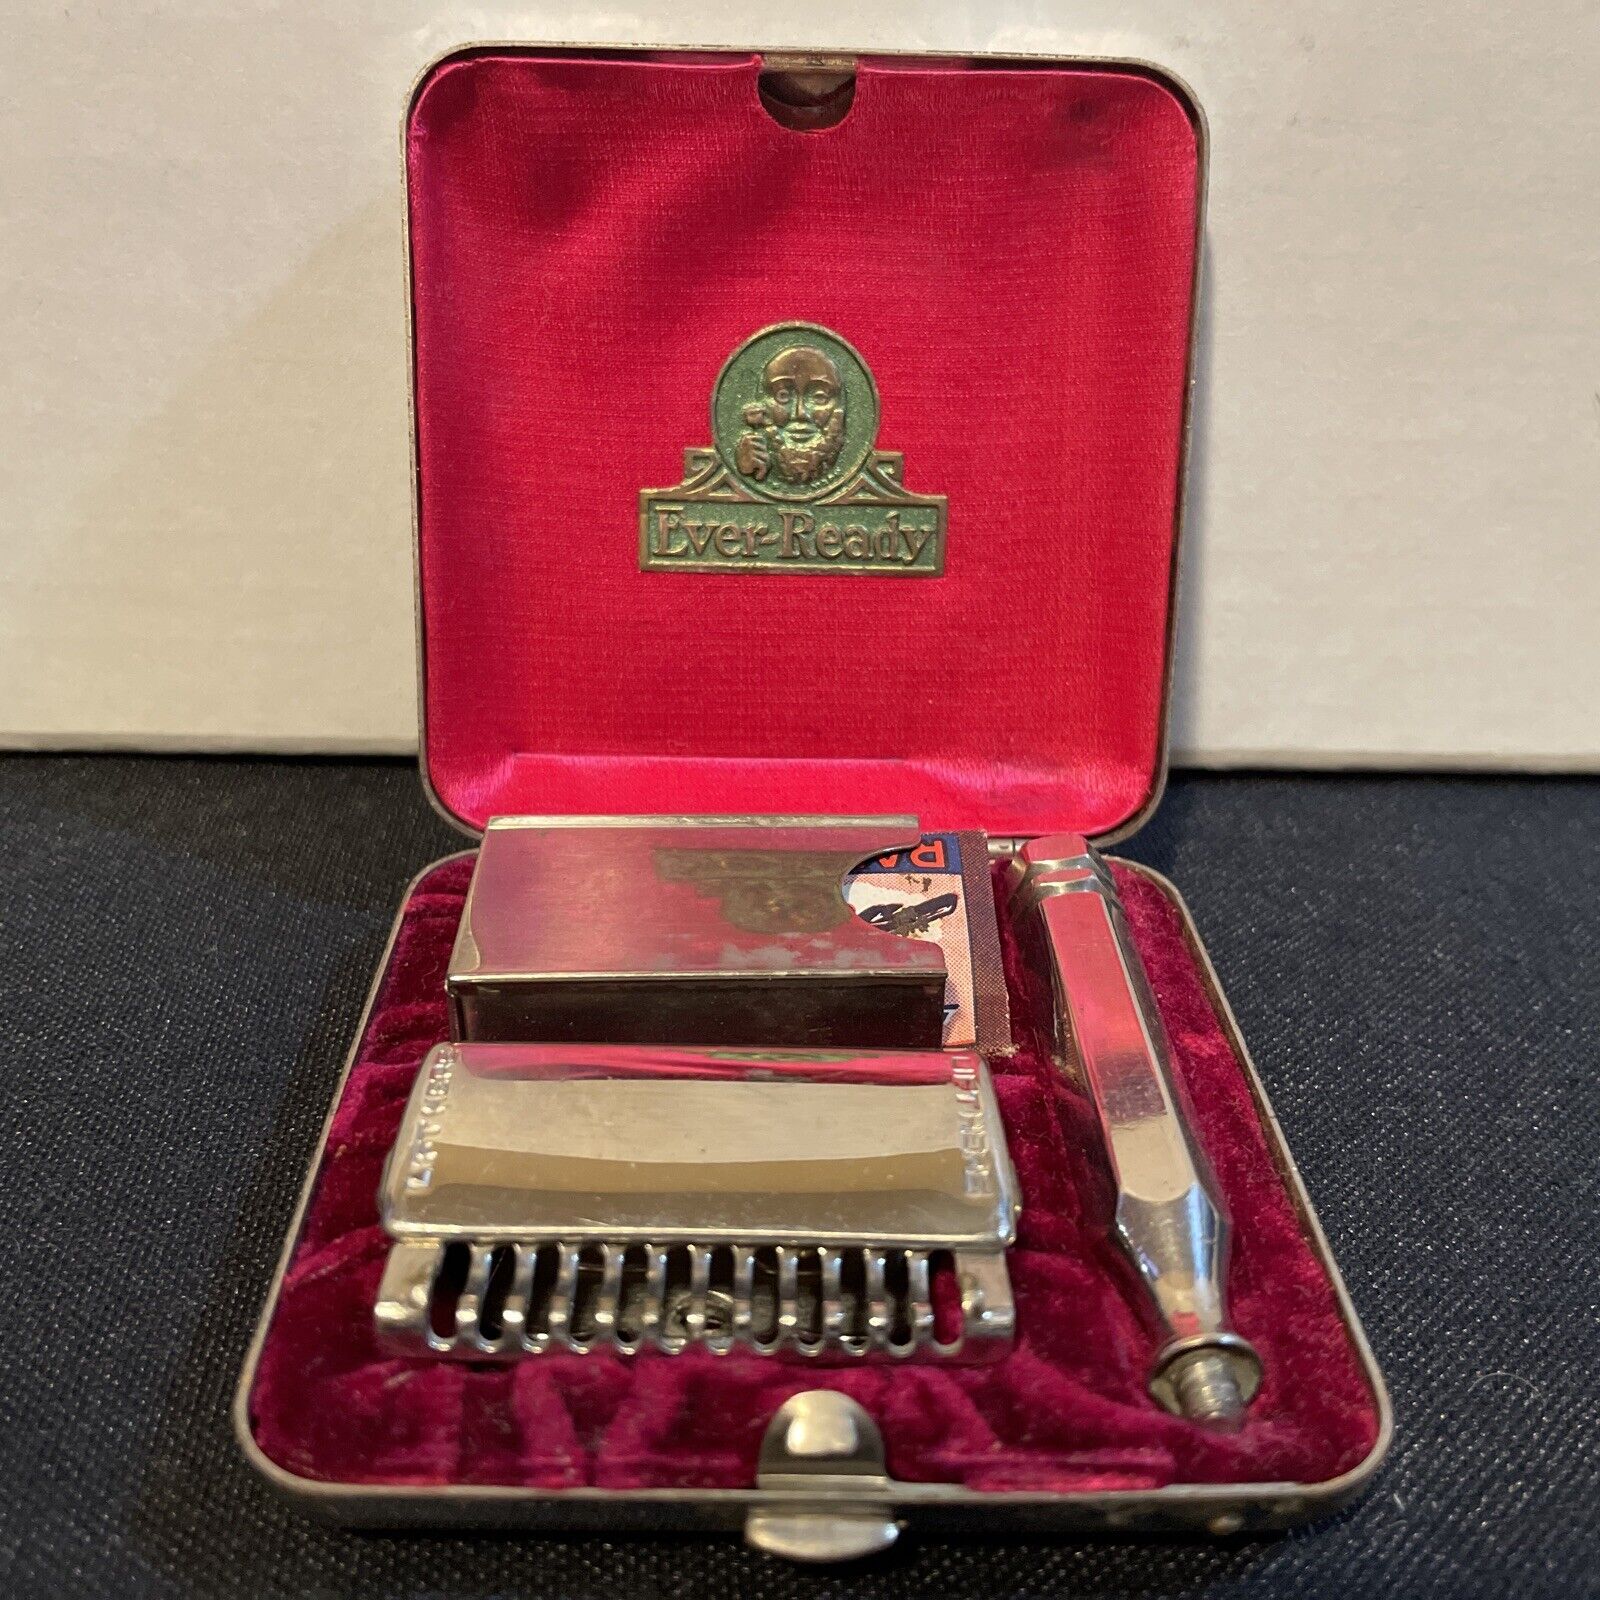 Vintage Ever-Ready Safety Razor w/Chrome Plated Case Patented March 24/14